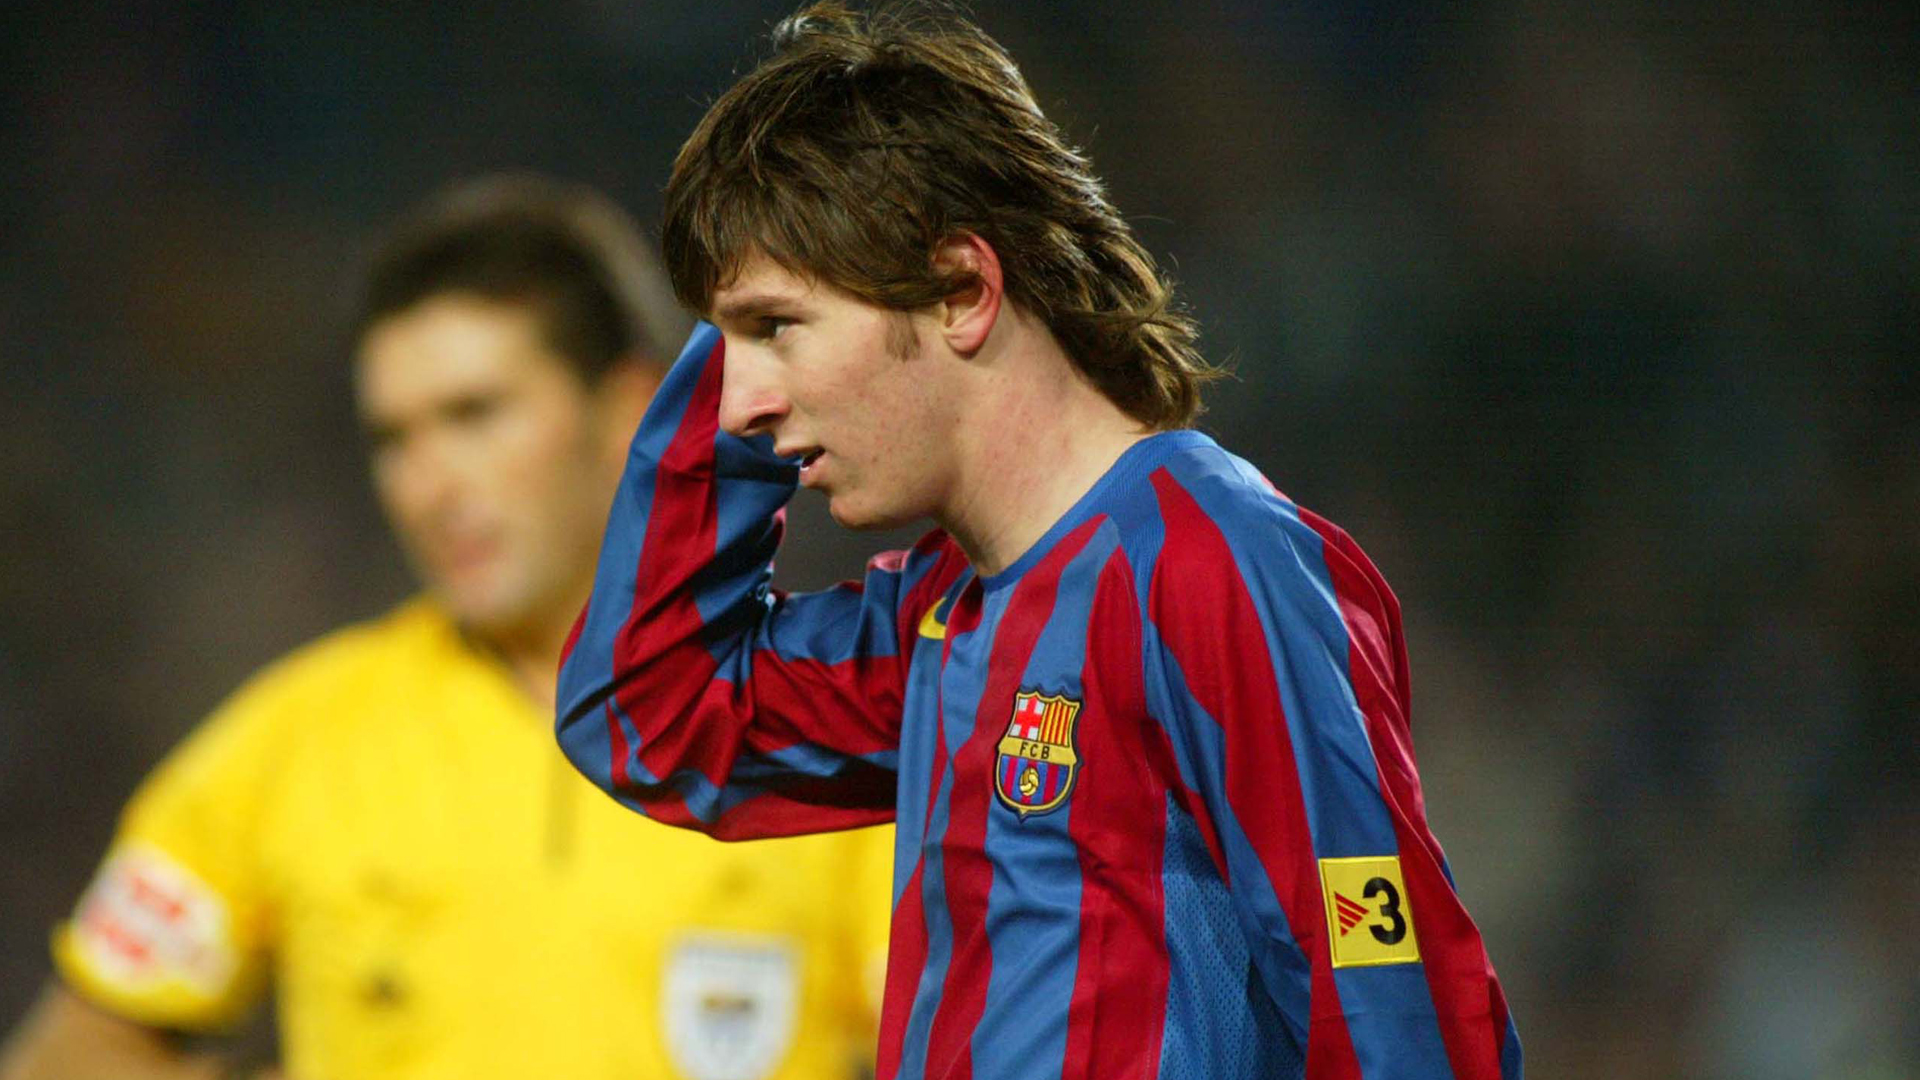 OC Analyzing Messi's haircuts the haircut influential to one of the best players ever?